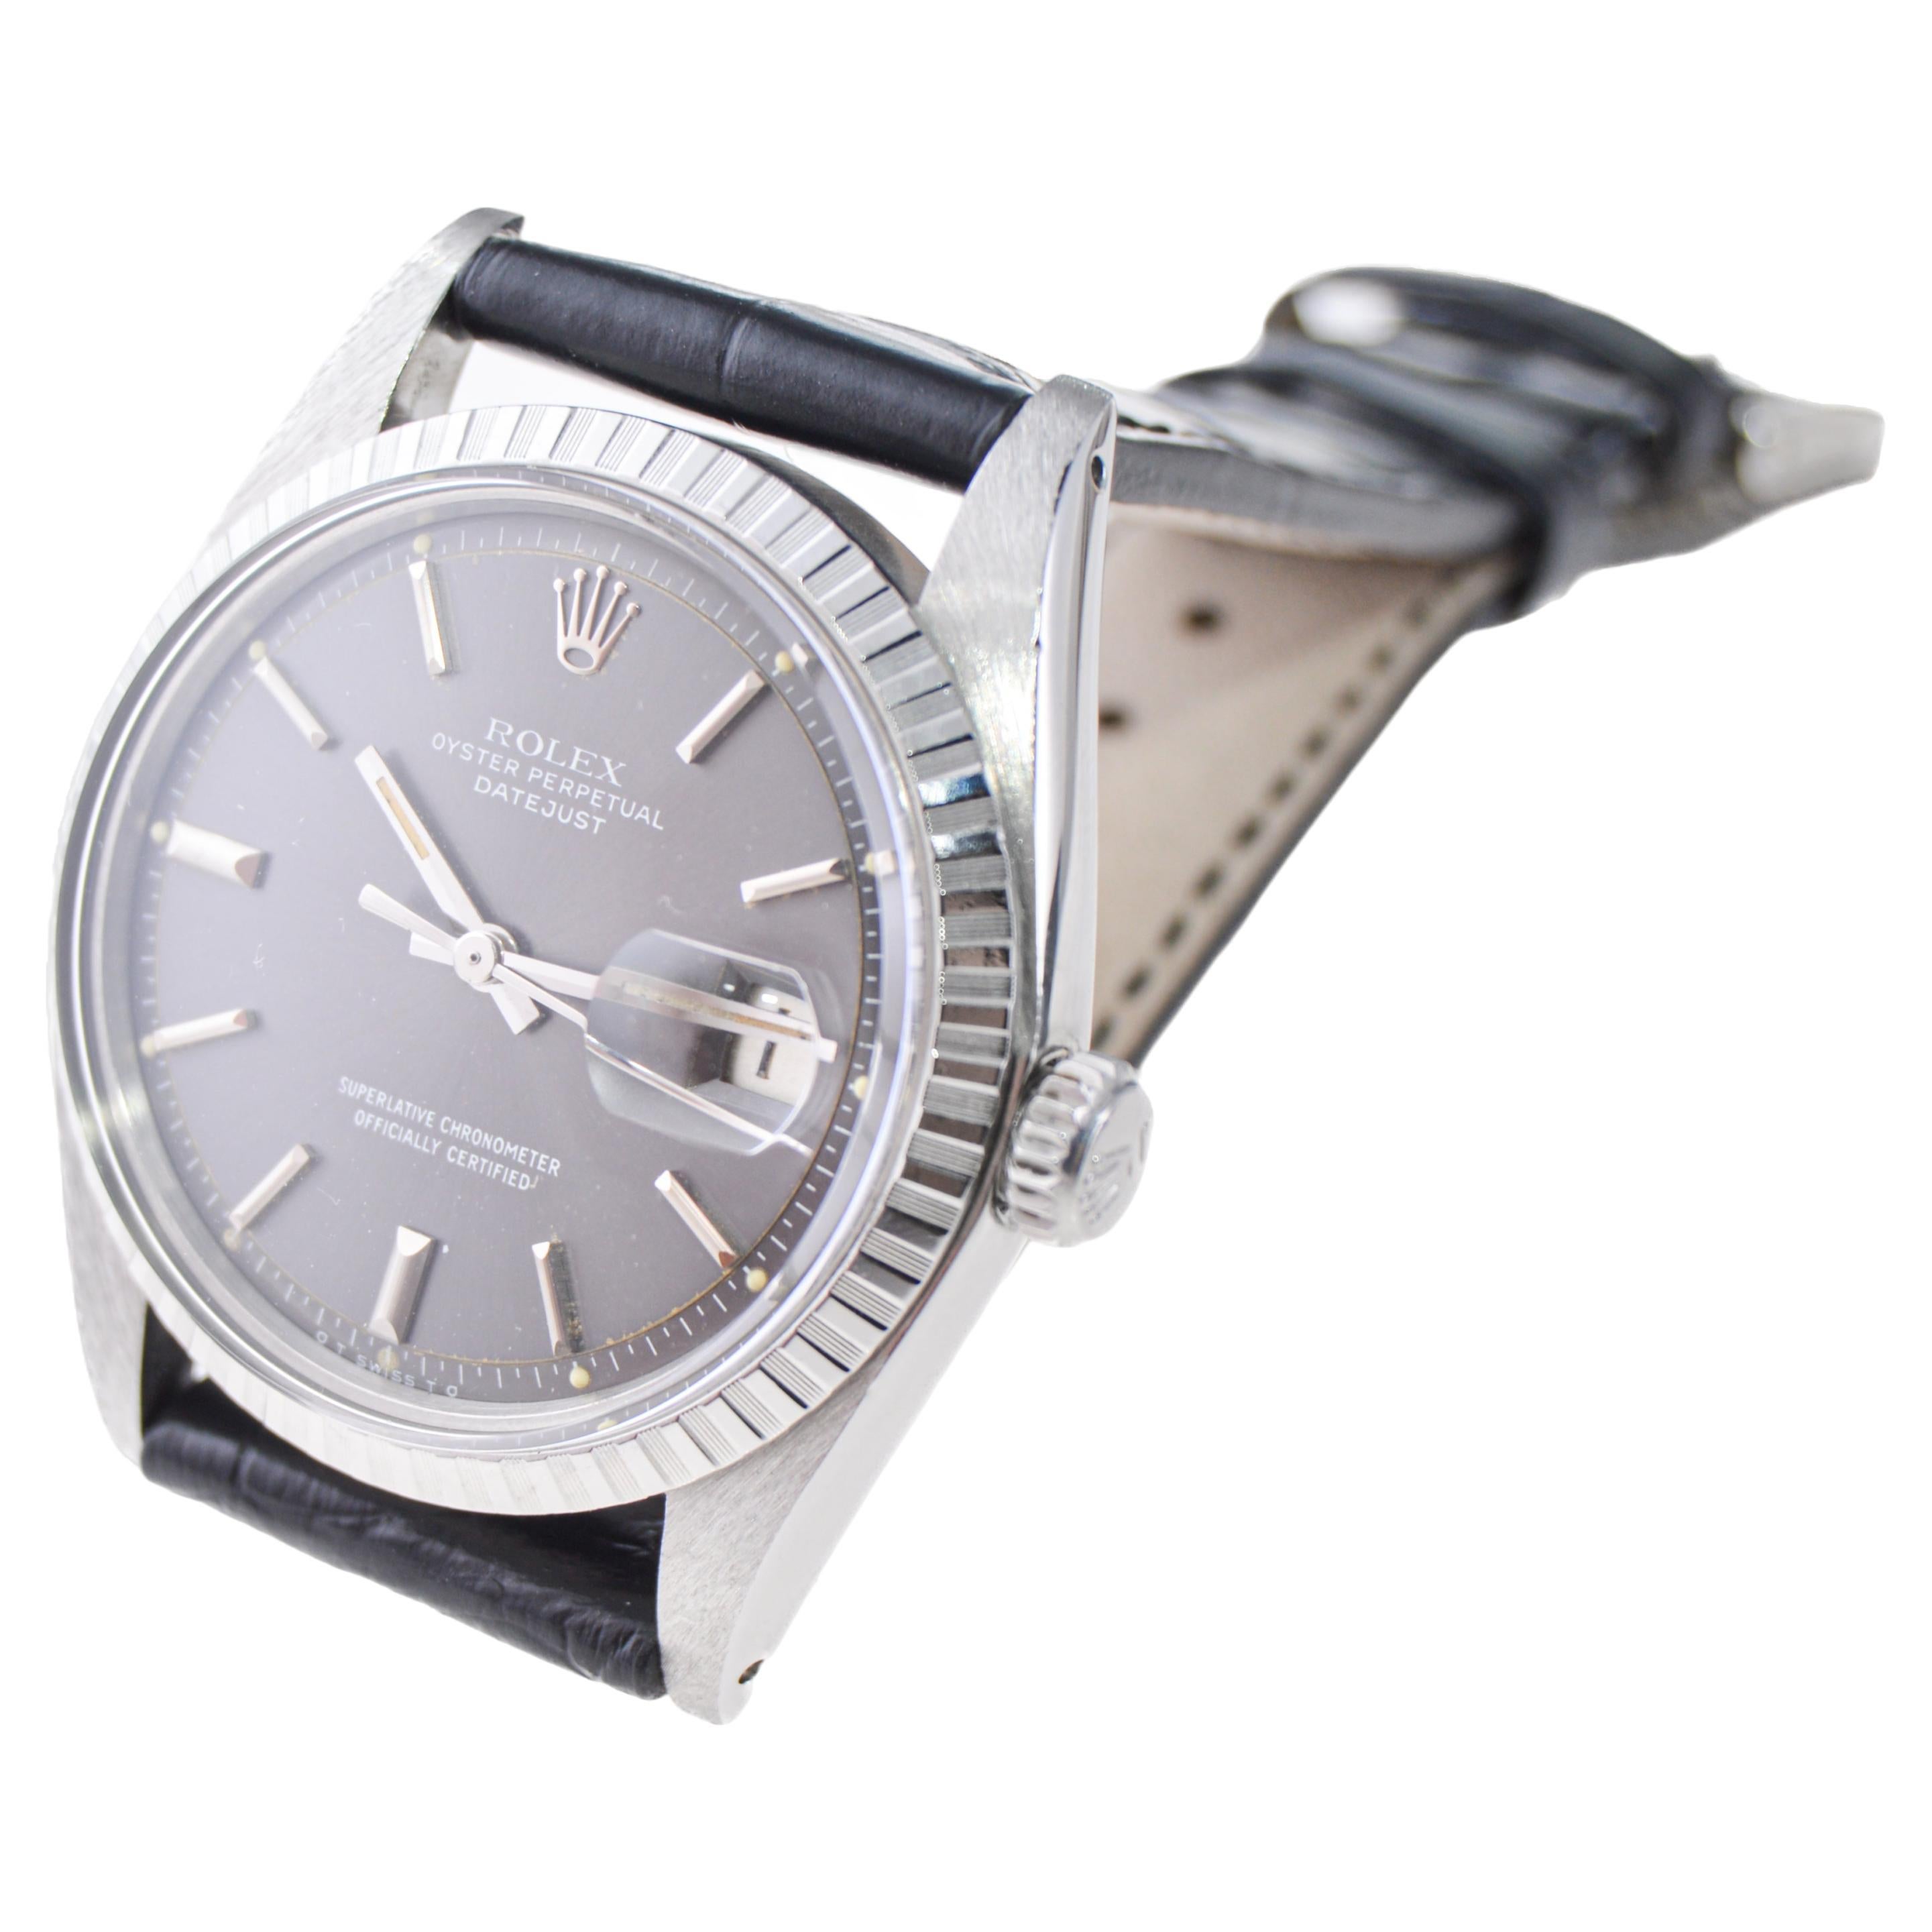 Rolex Steel Datejust with Rare Original Charcoal Dial from, 1960's For Sale 2